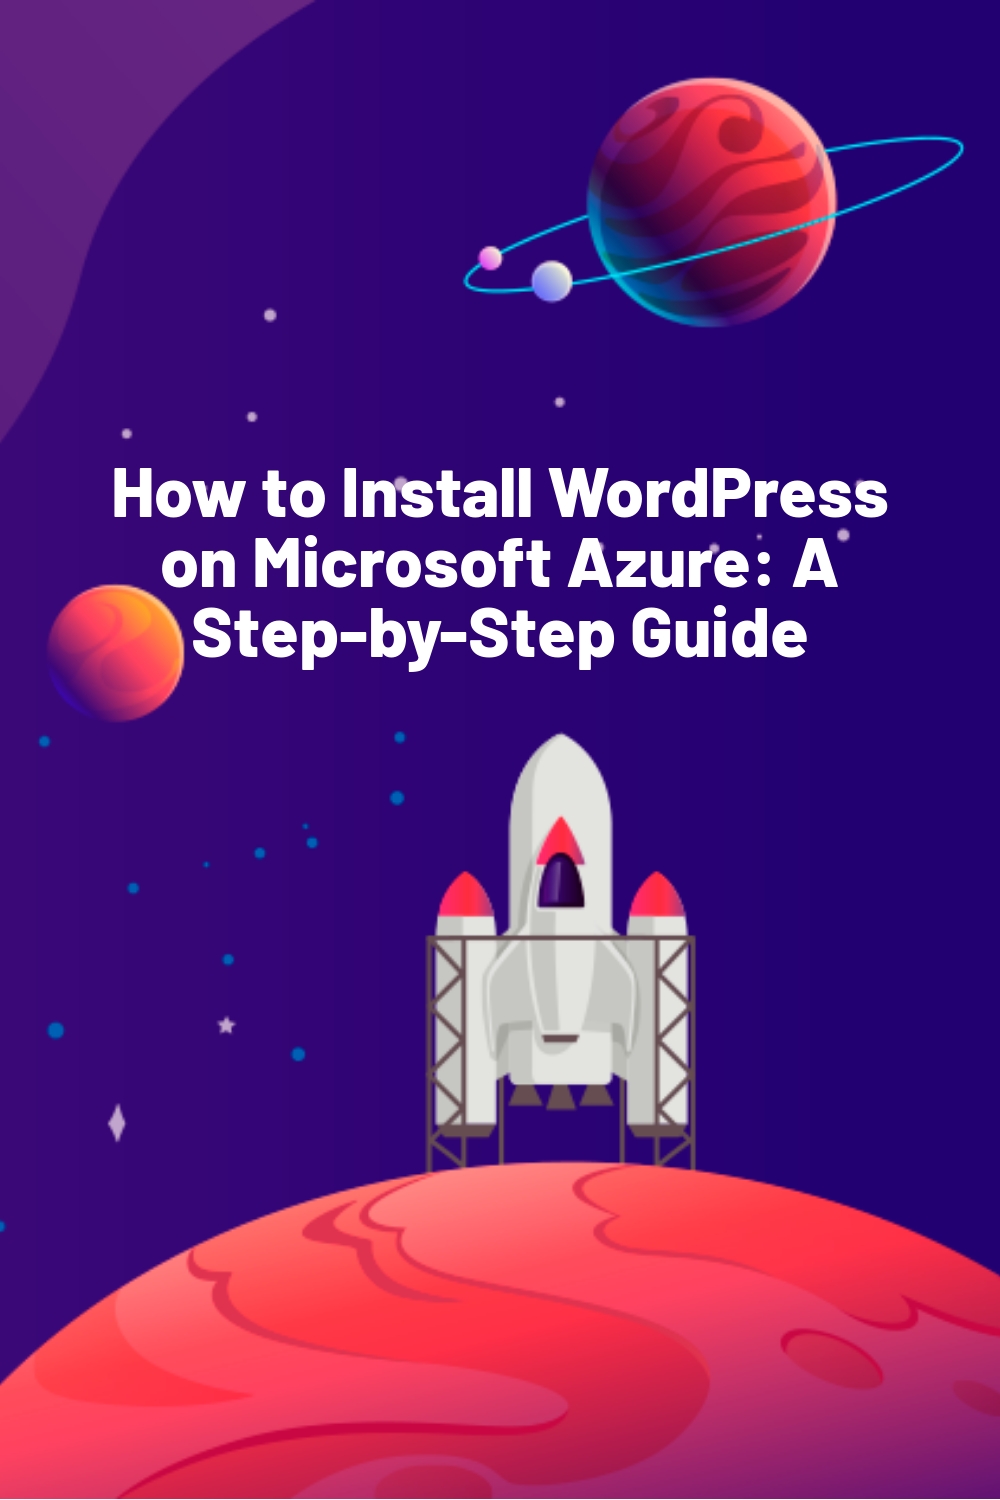 How to Install WordPress on Microsoft Azure: A Step-by-Step Guide